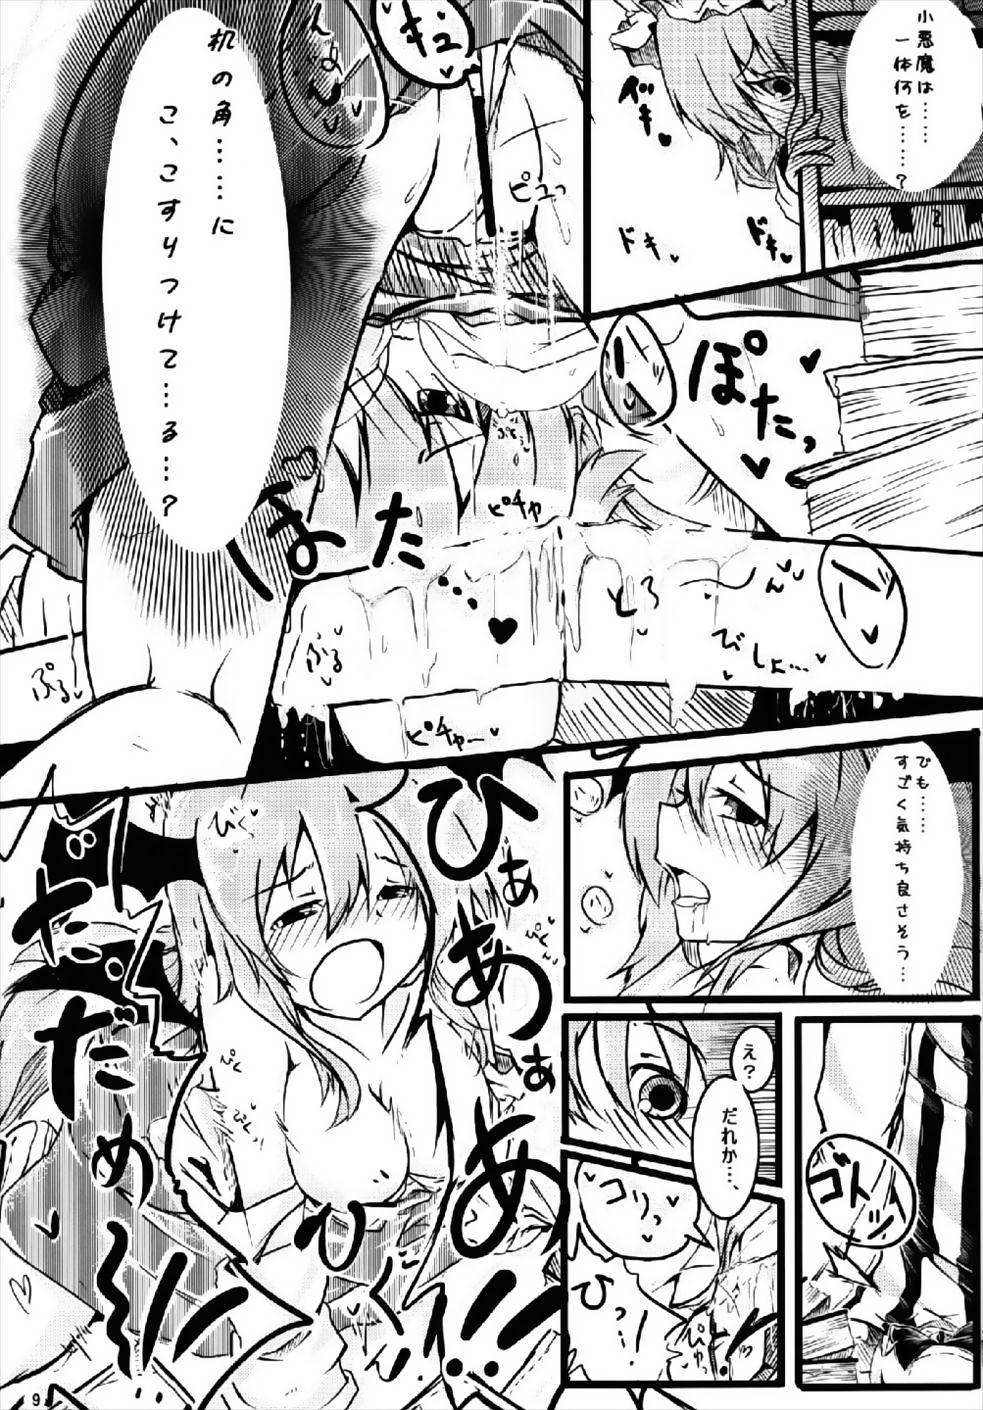 Hard Core Porn RemiFlaPatche! - Touhou project Gay Party - Page 8